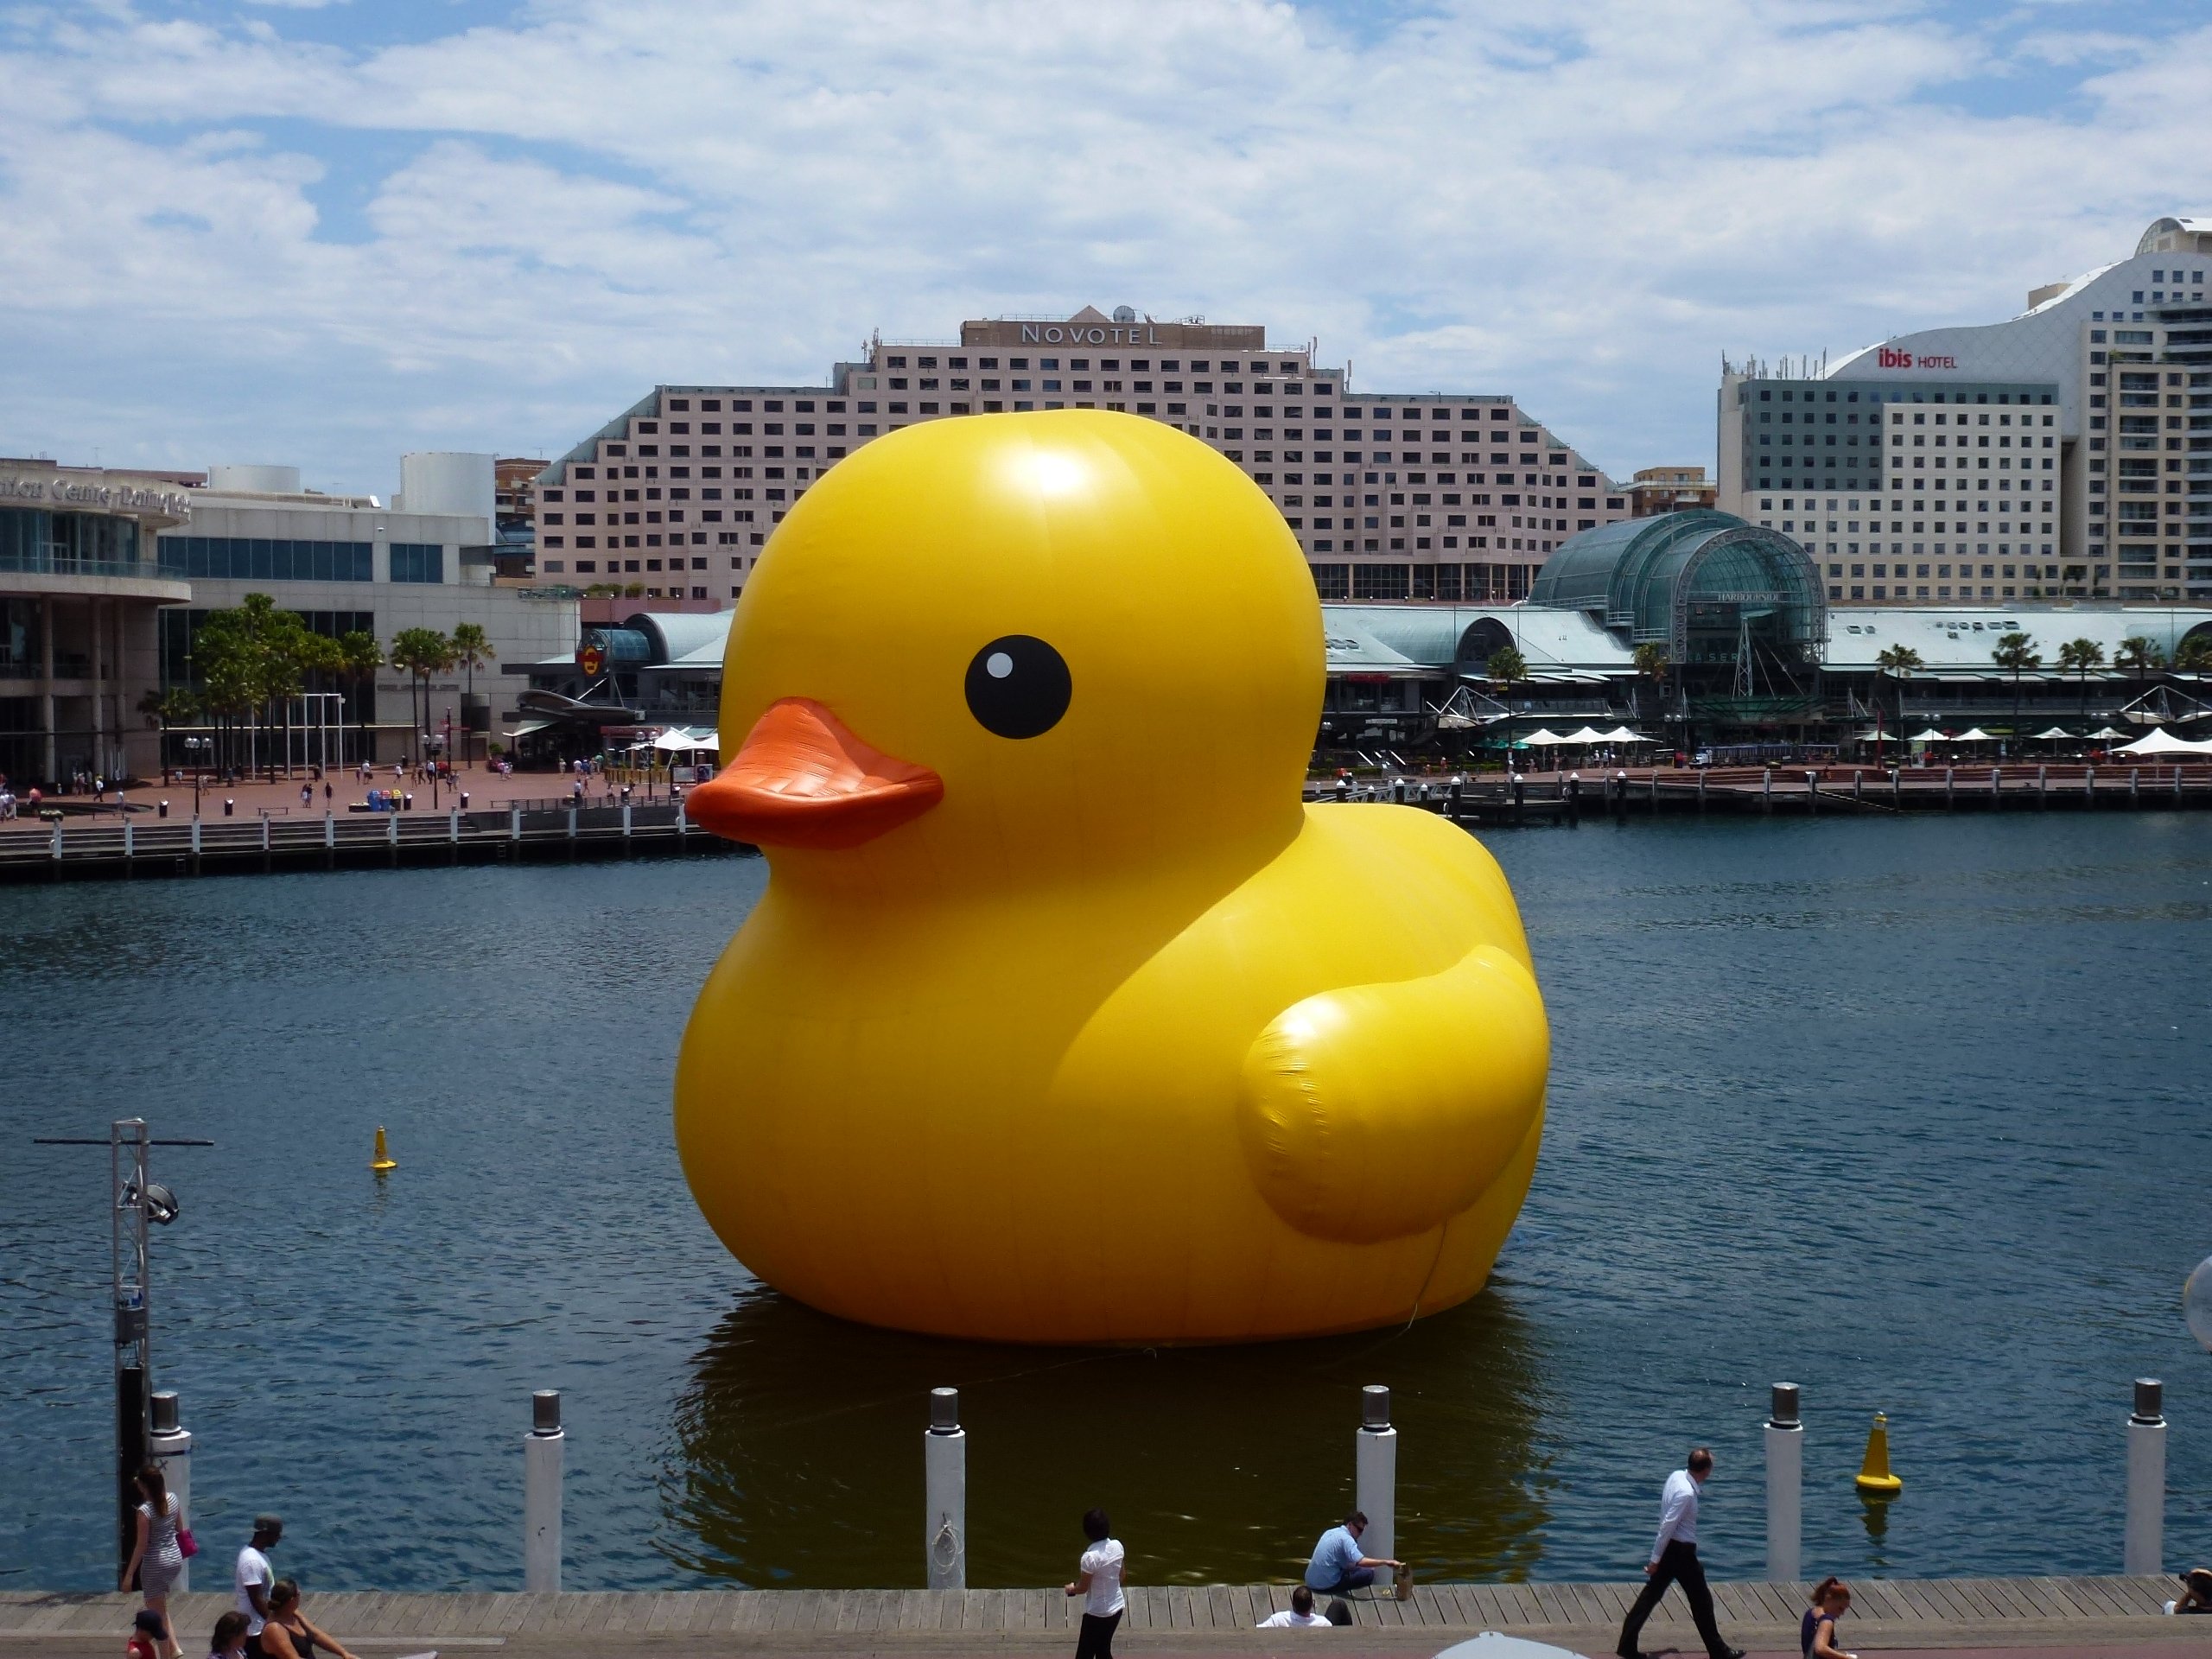 Giant Rubber Duck Giant rubber duck